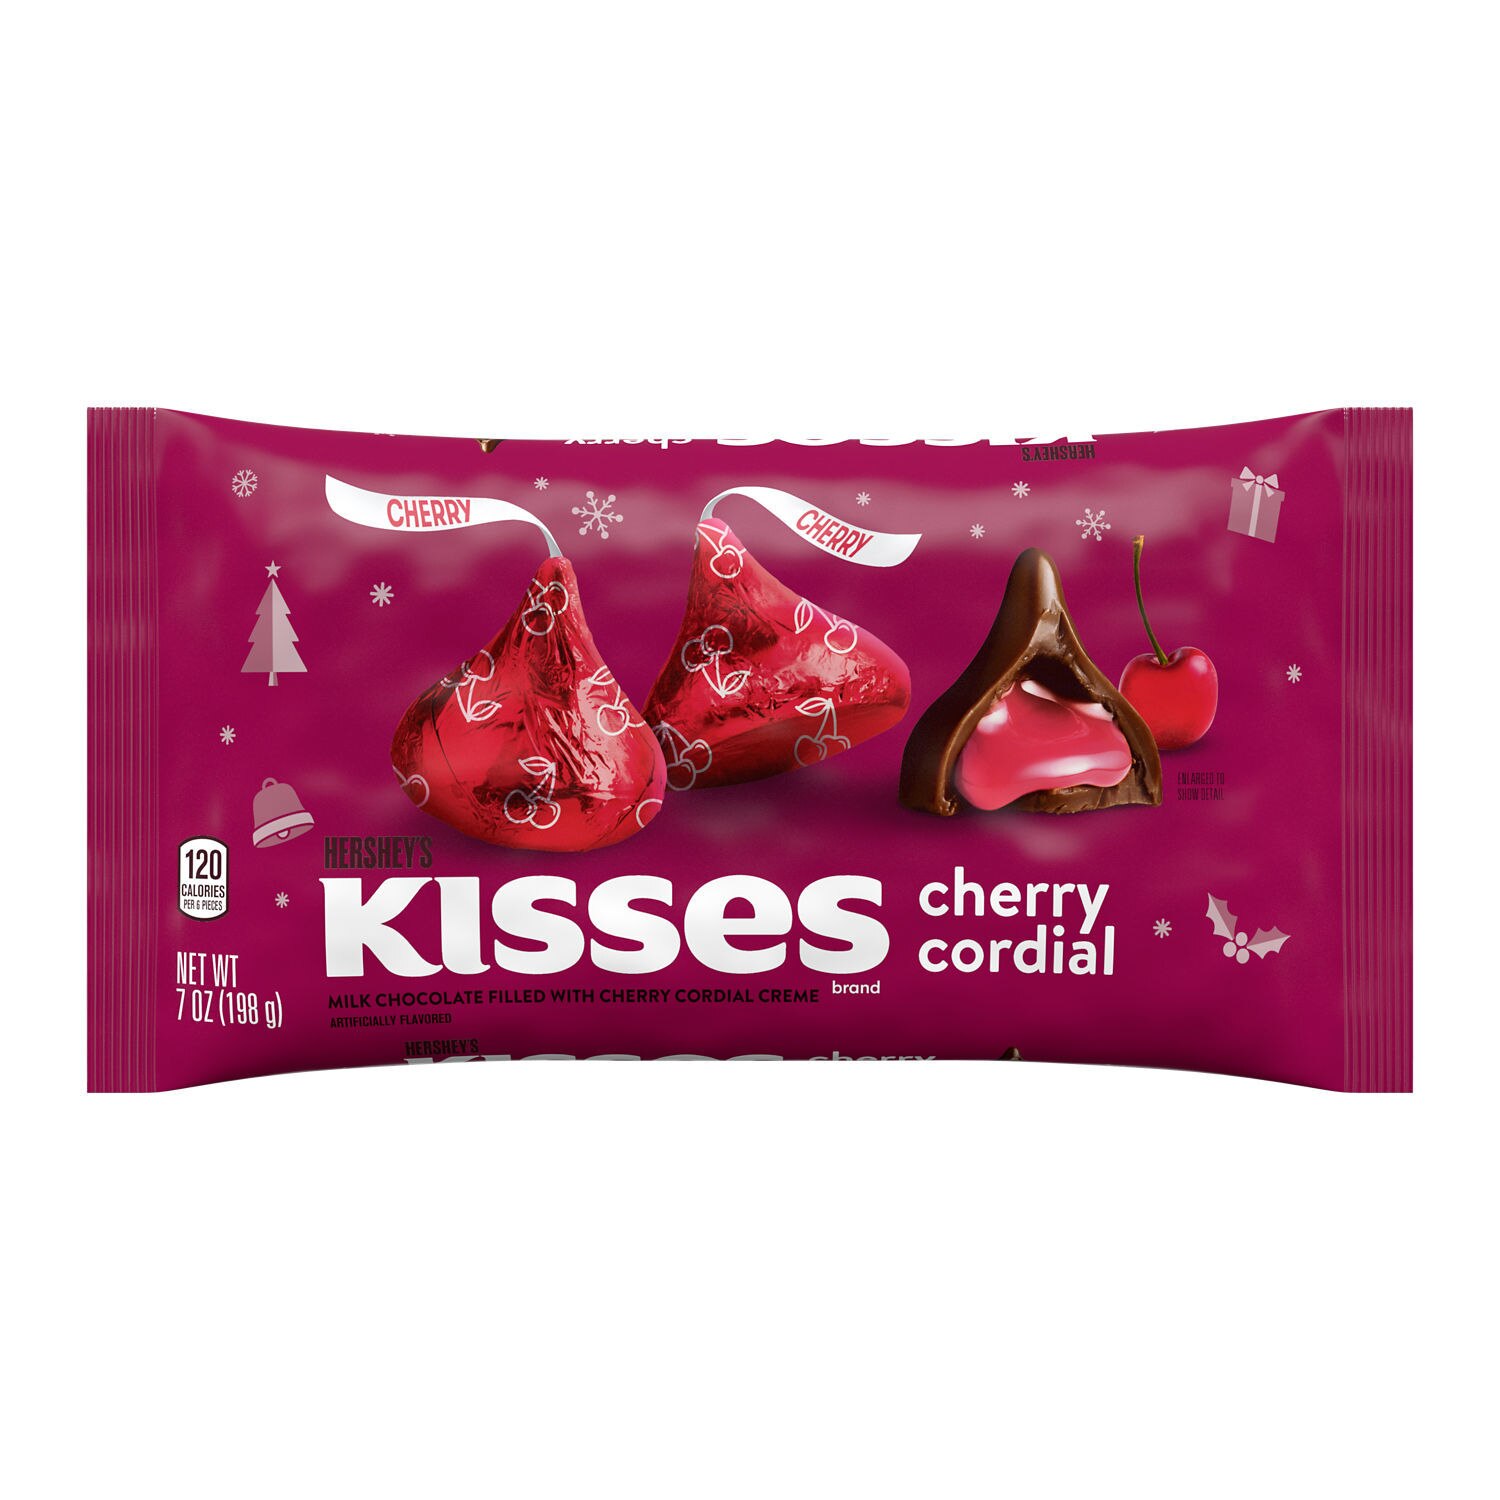 Hershey's Kisses Brand With Cordial Creme, 8 OZ, 12 CT